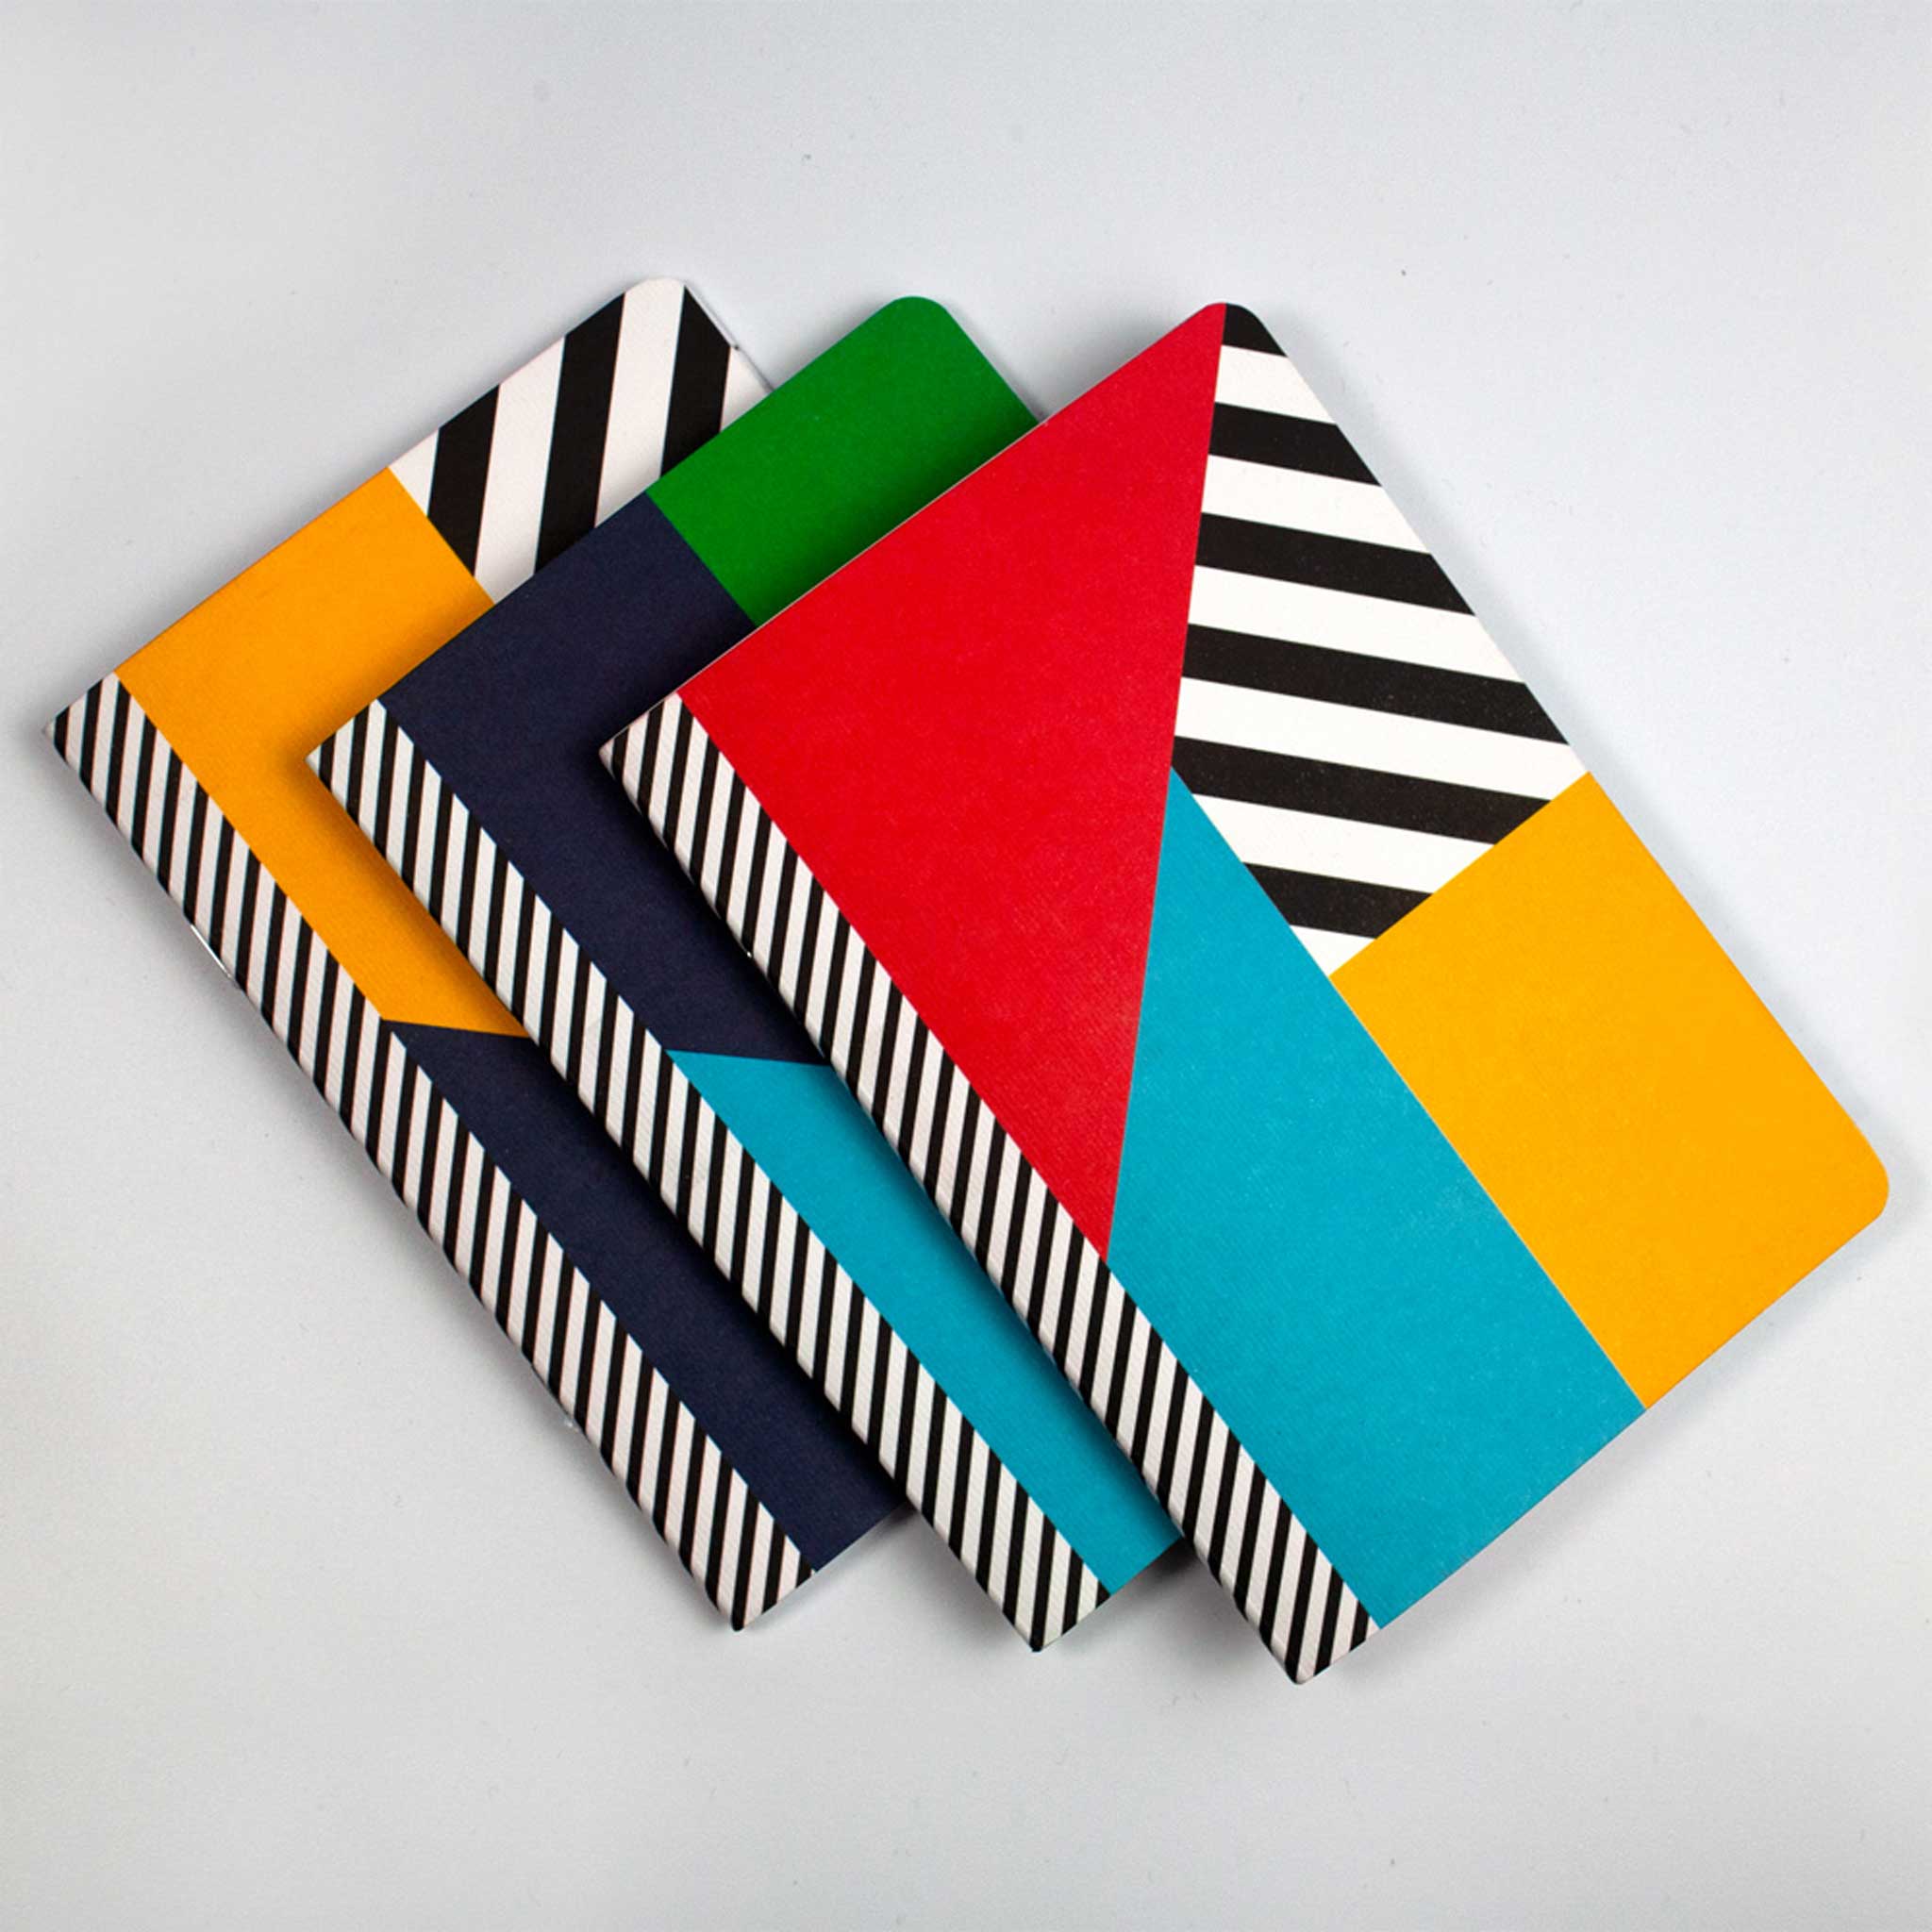 RUNWAY POCKET NOTEBOOKS | 3x lined NOTEBOOKS | A6 & 48 pages | nolki